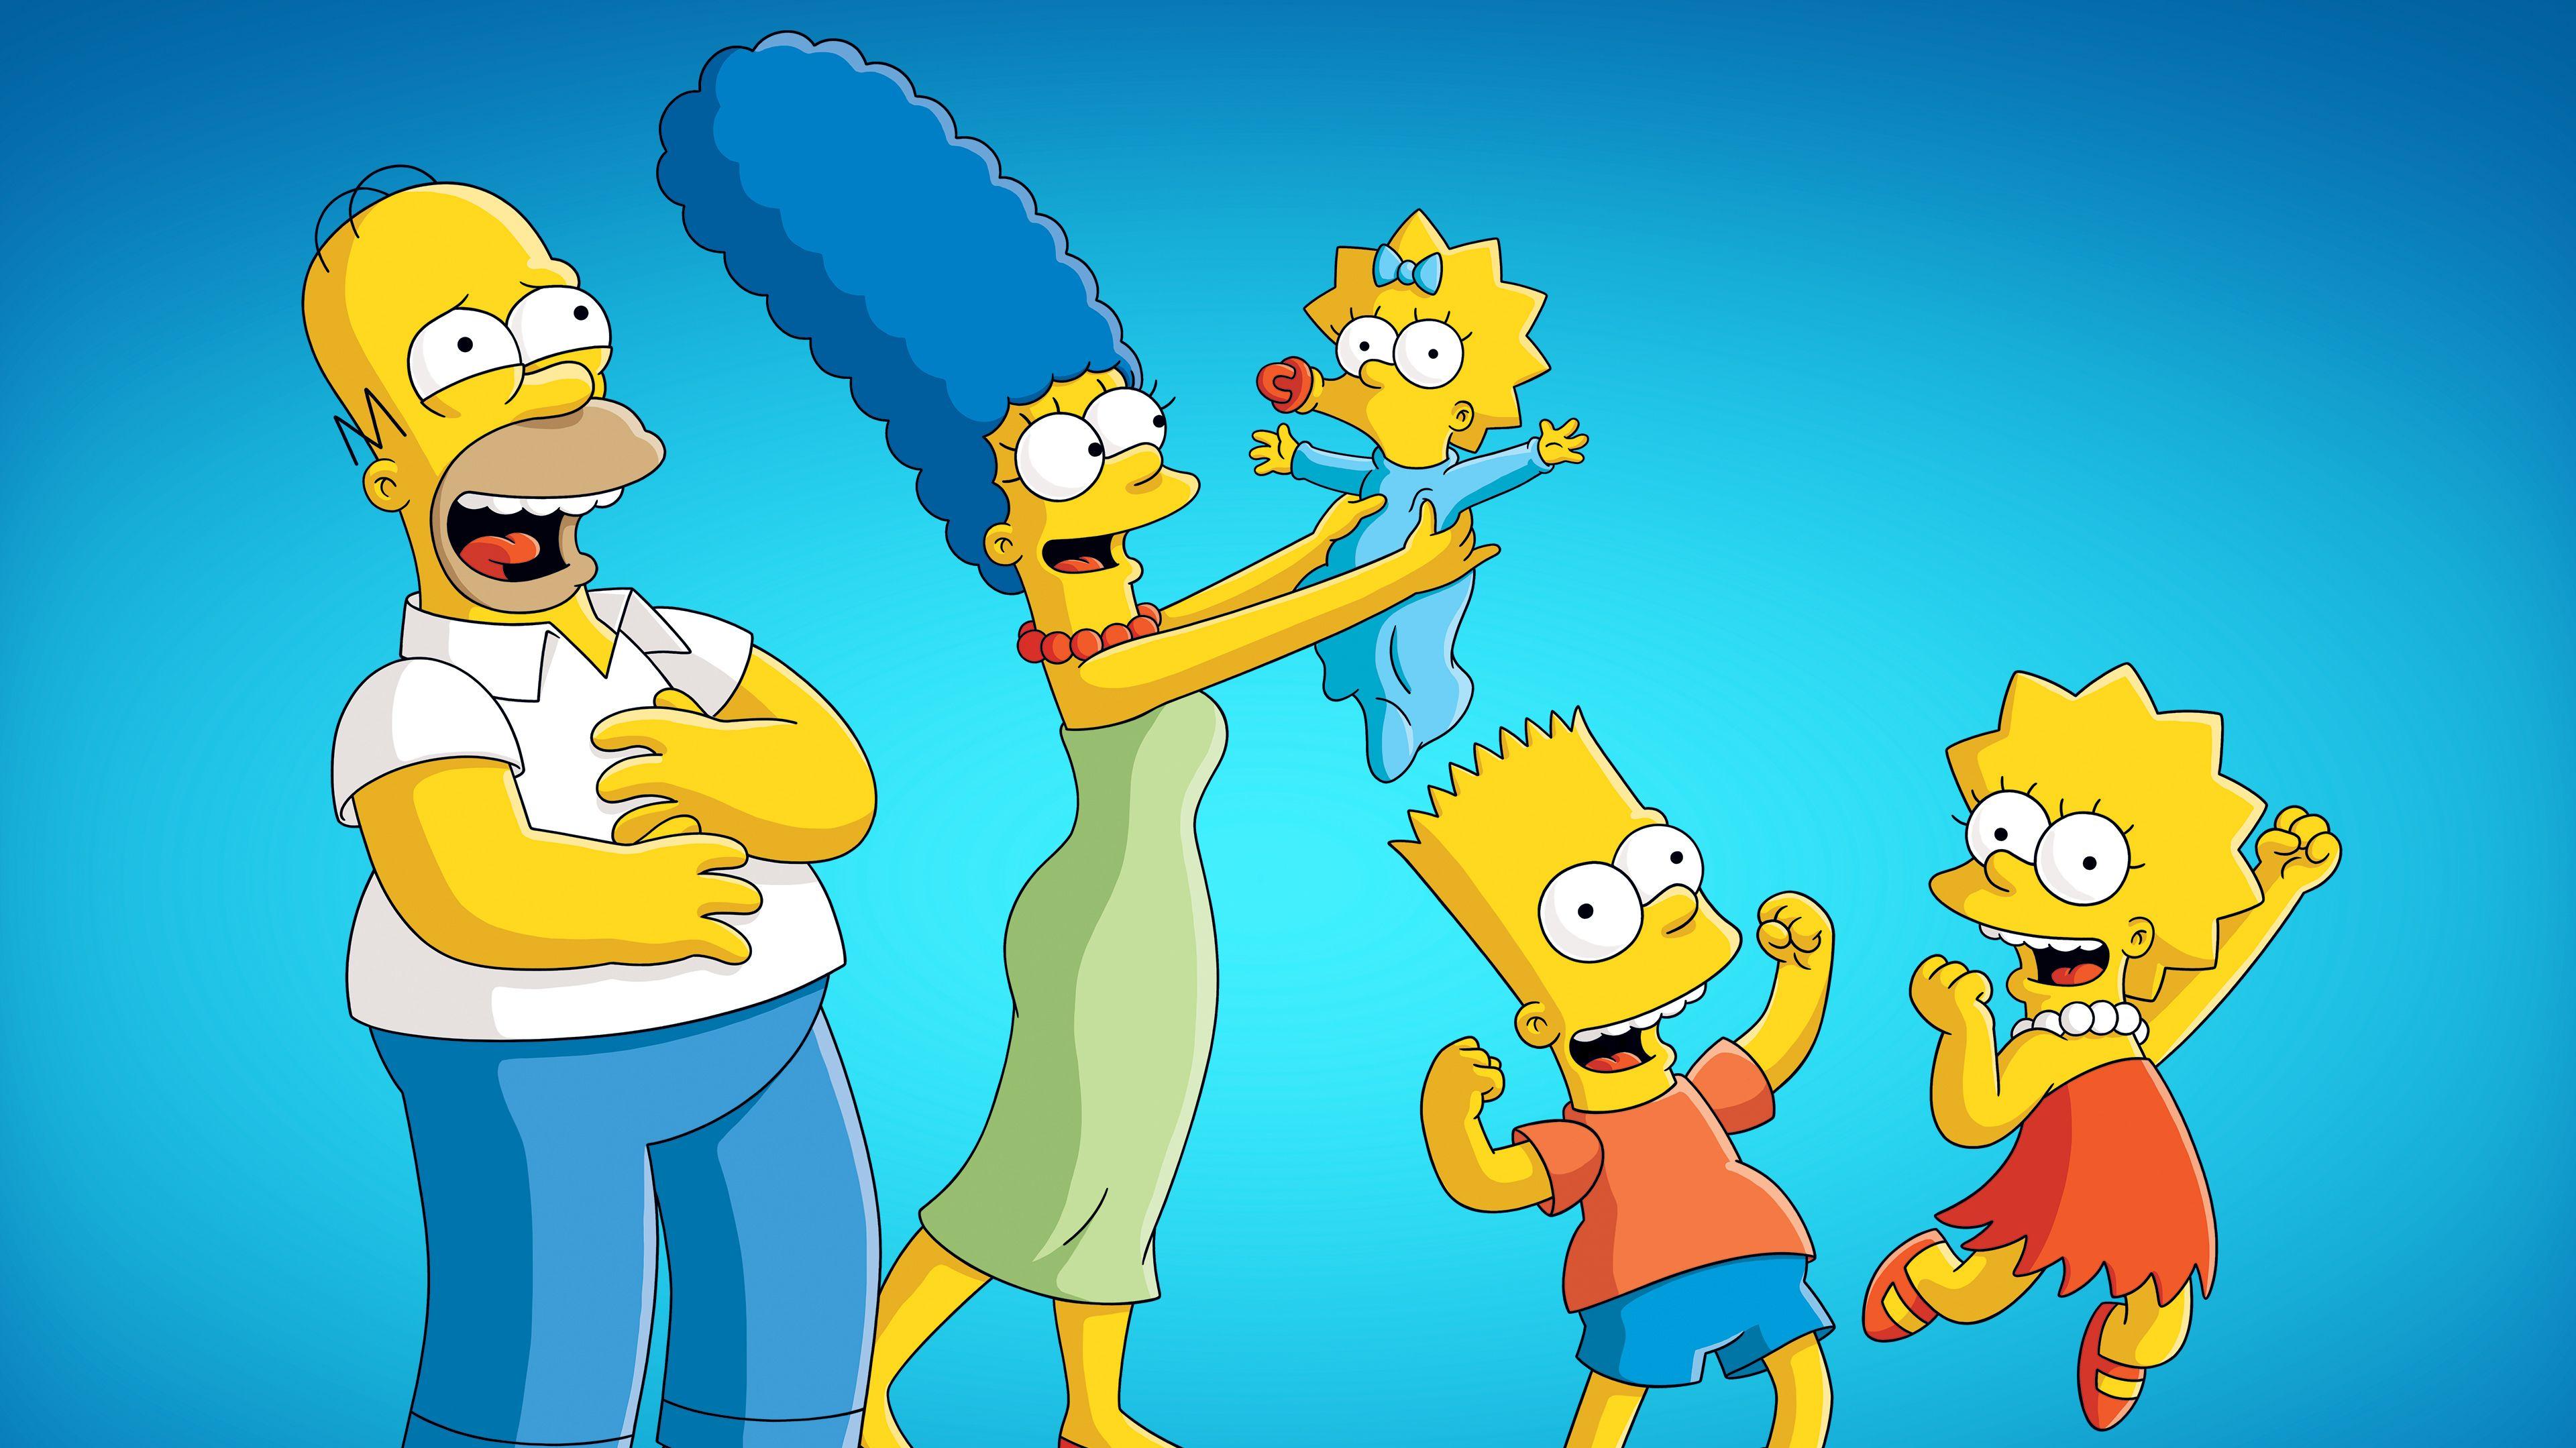 Wallpapers The Simpsons HD - Wallpaper Cave